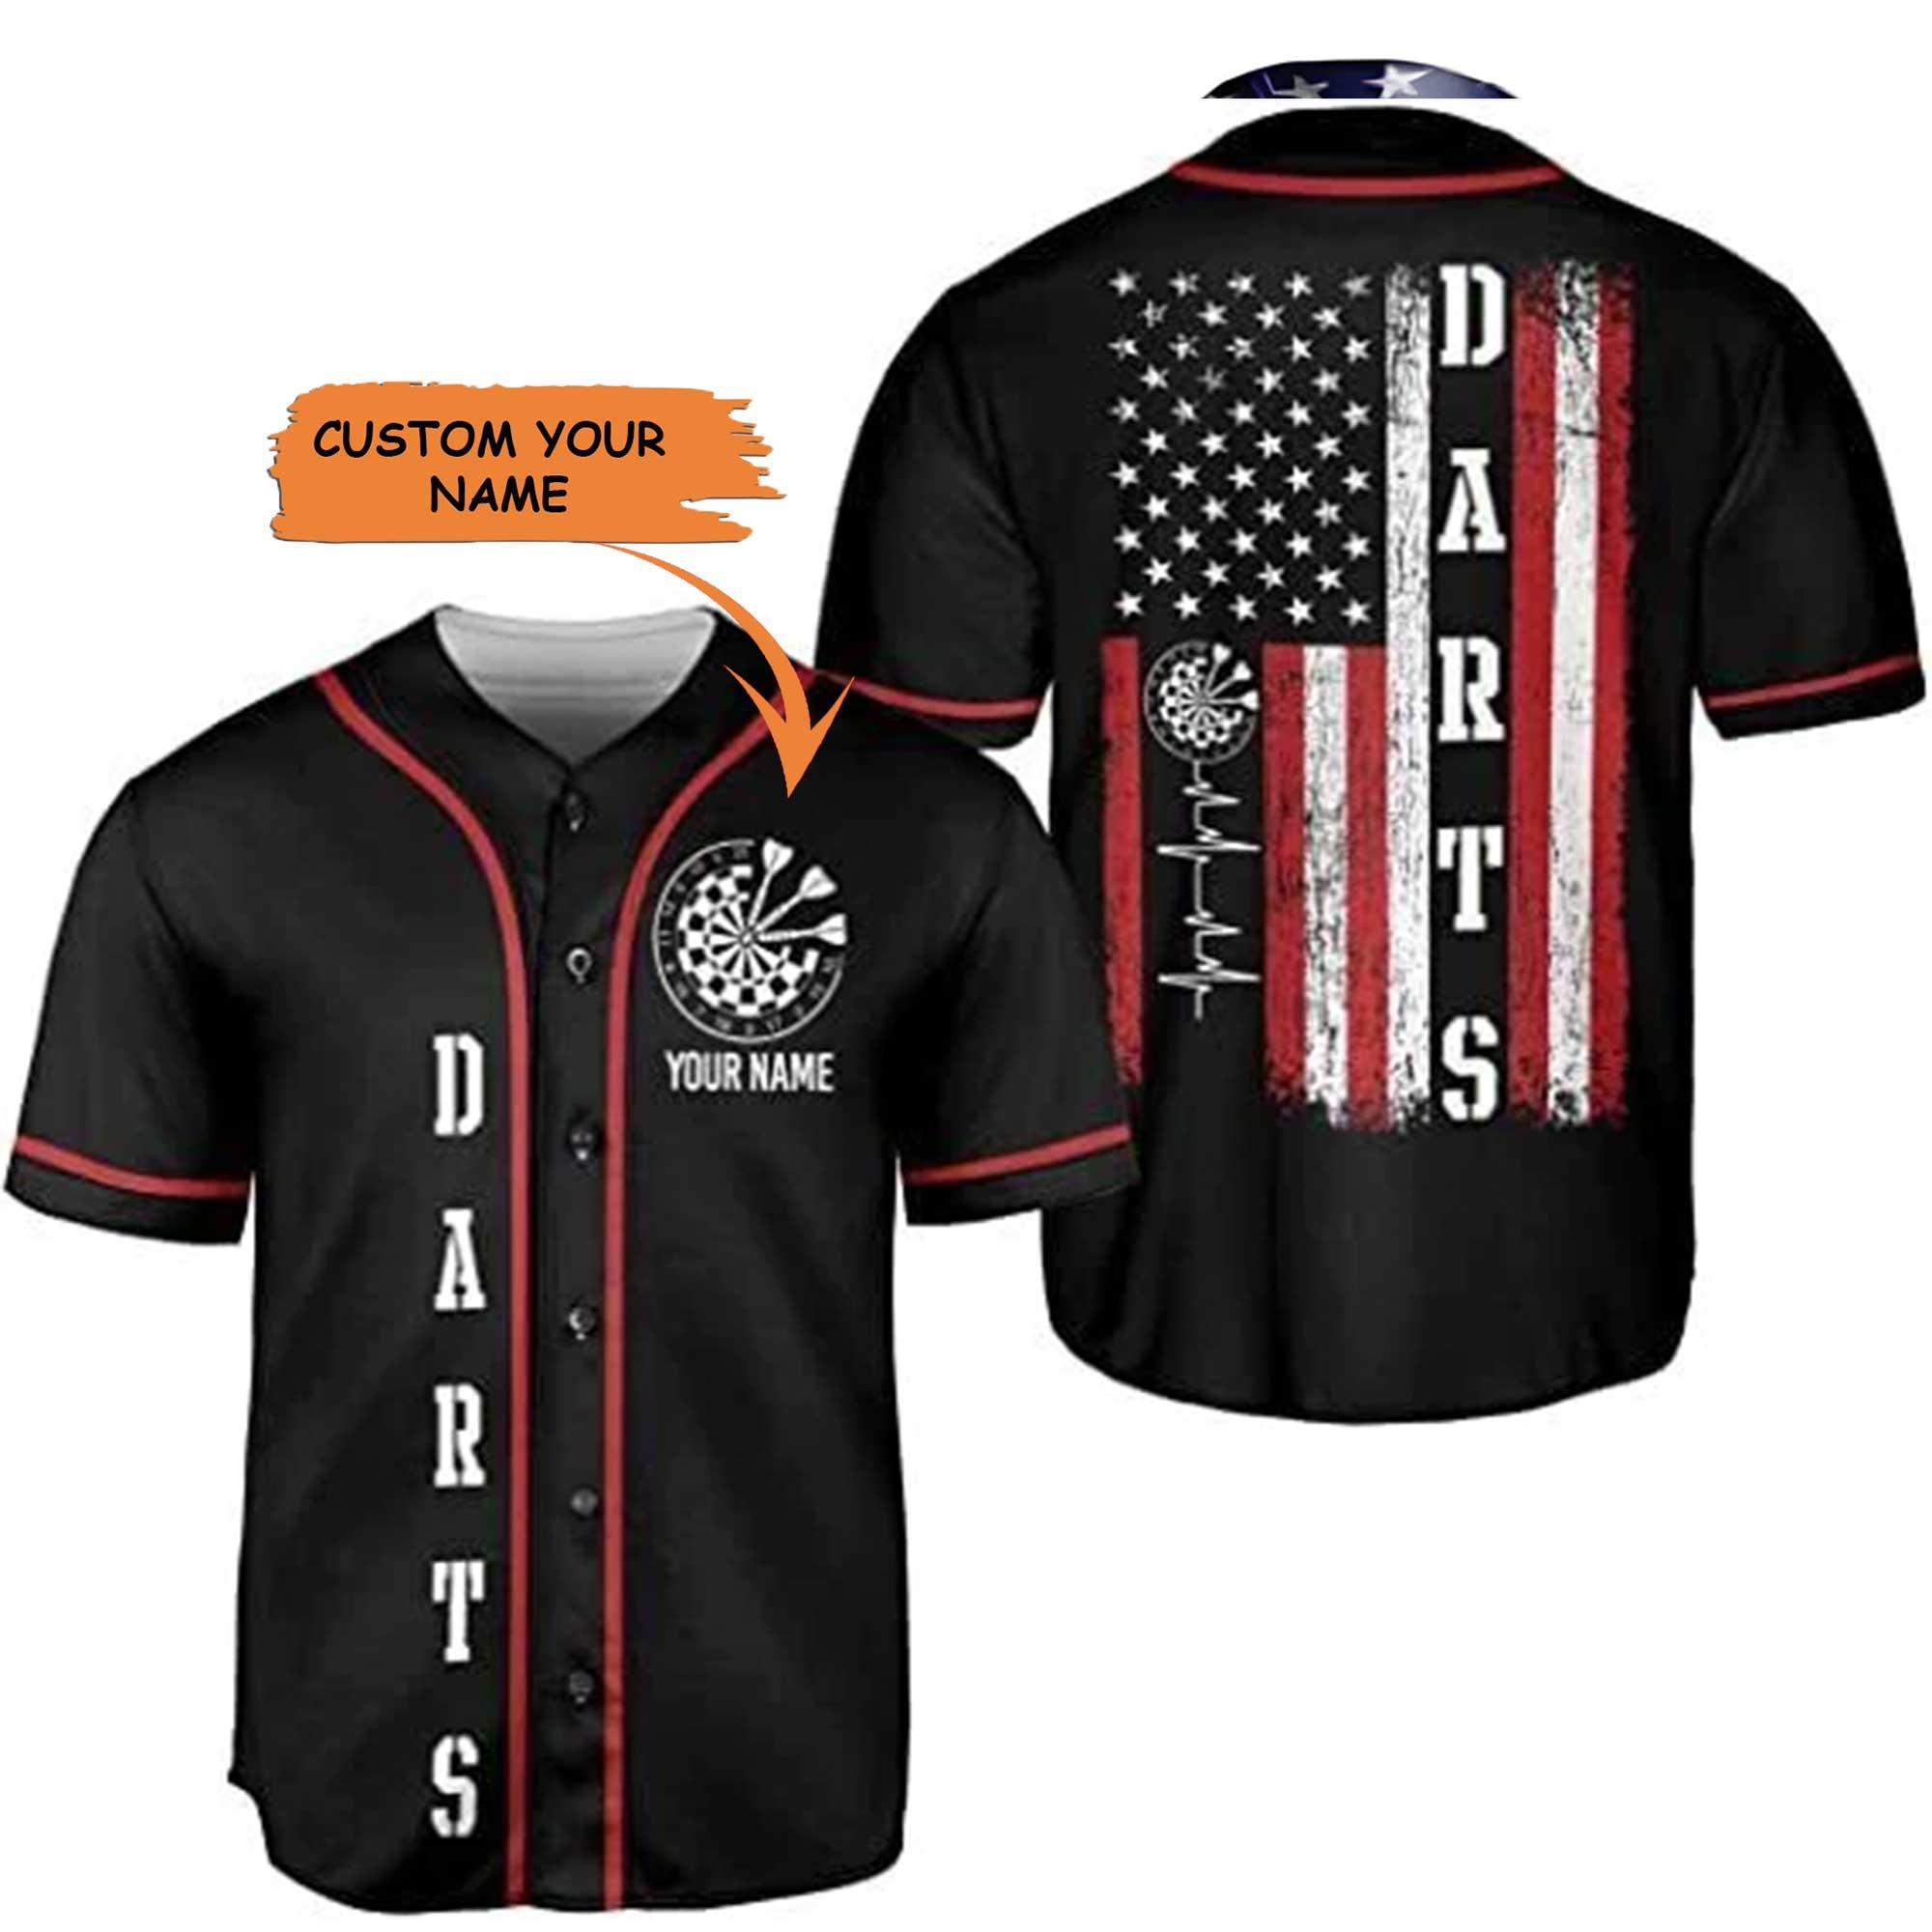 Darts Custom Name Baseball Jersey, Personalized Heartbeat American Flag Baseball Jersey For Men Women, Fourth Of July Apparel Gift For Darts Lovers - Amzanimalsgift